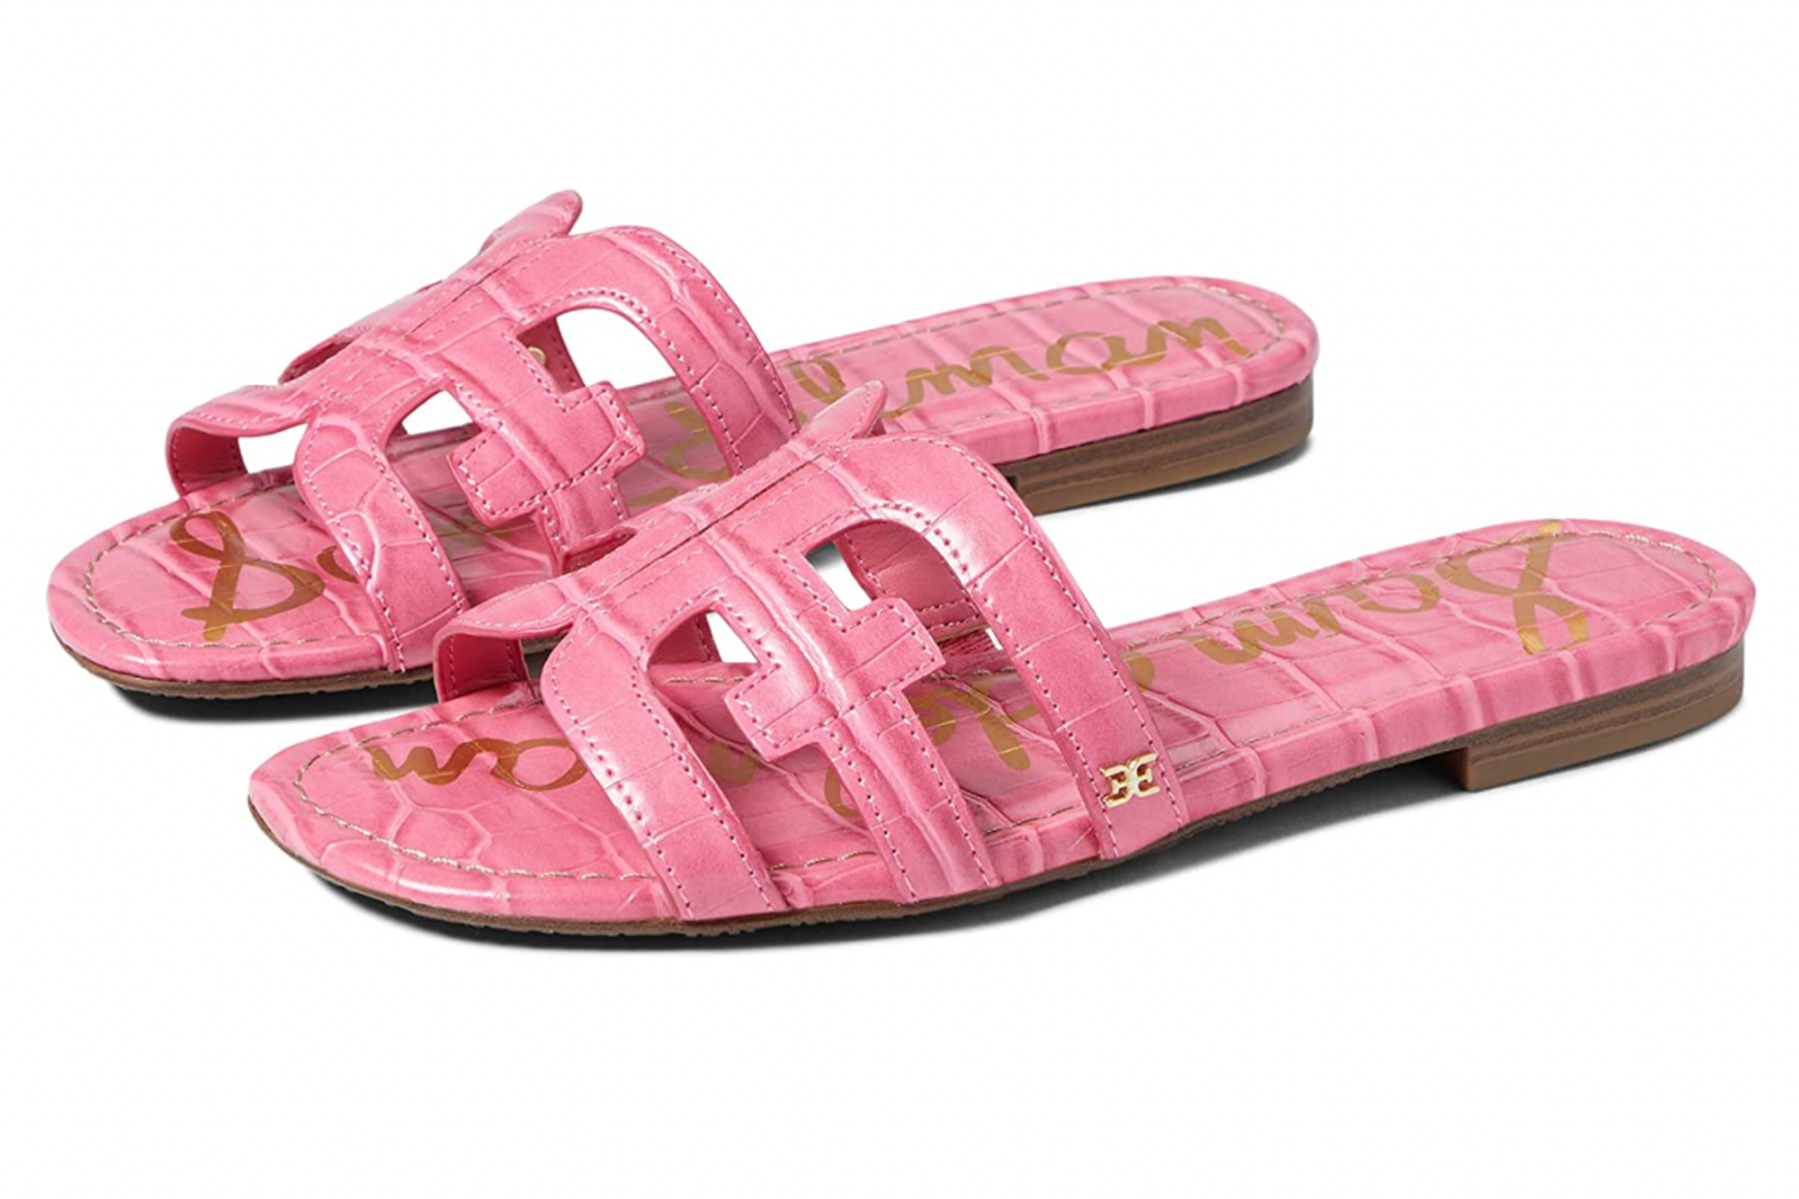 These Sam Edelman Sandals Are Super Stylish and Comfy for Summer